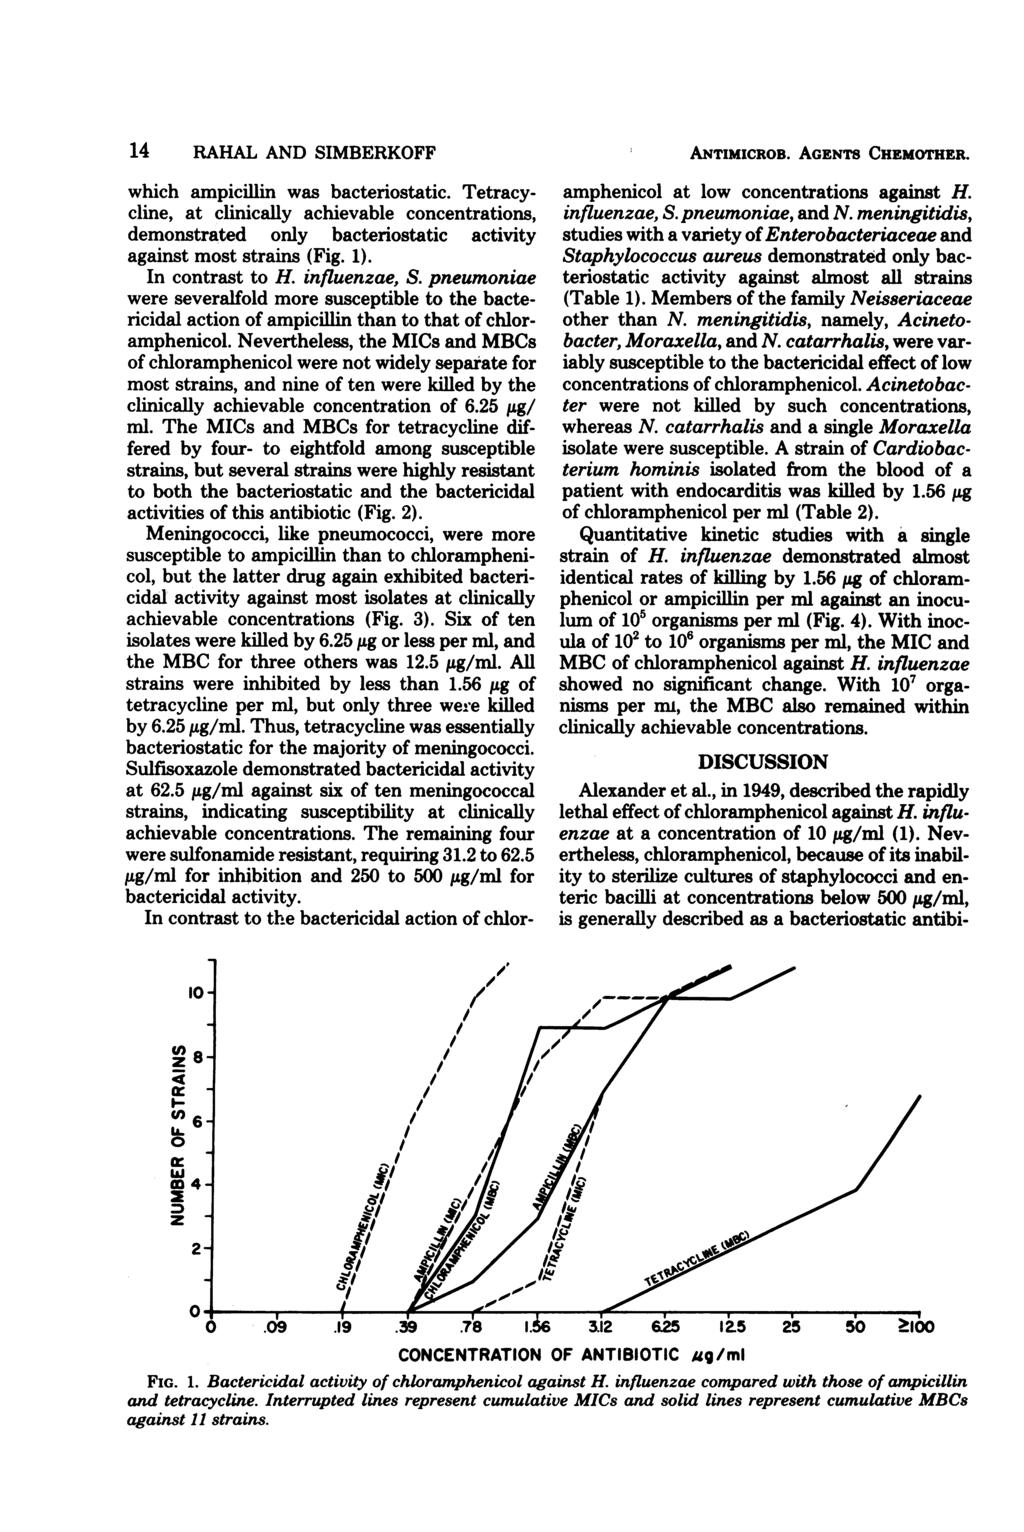 14 RAHAL AND SIMBERKOFF which ampicillin was bacteriostatic. Tetracycline, at clinically achievable concentrations, demonstrated only bacteriostatic activity against most strains (Fig. 1).